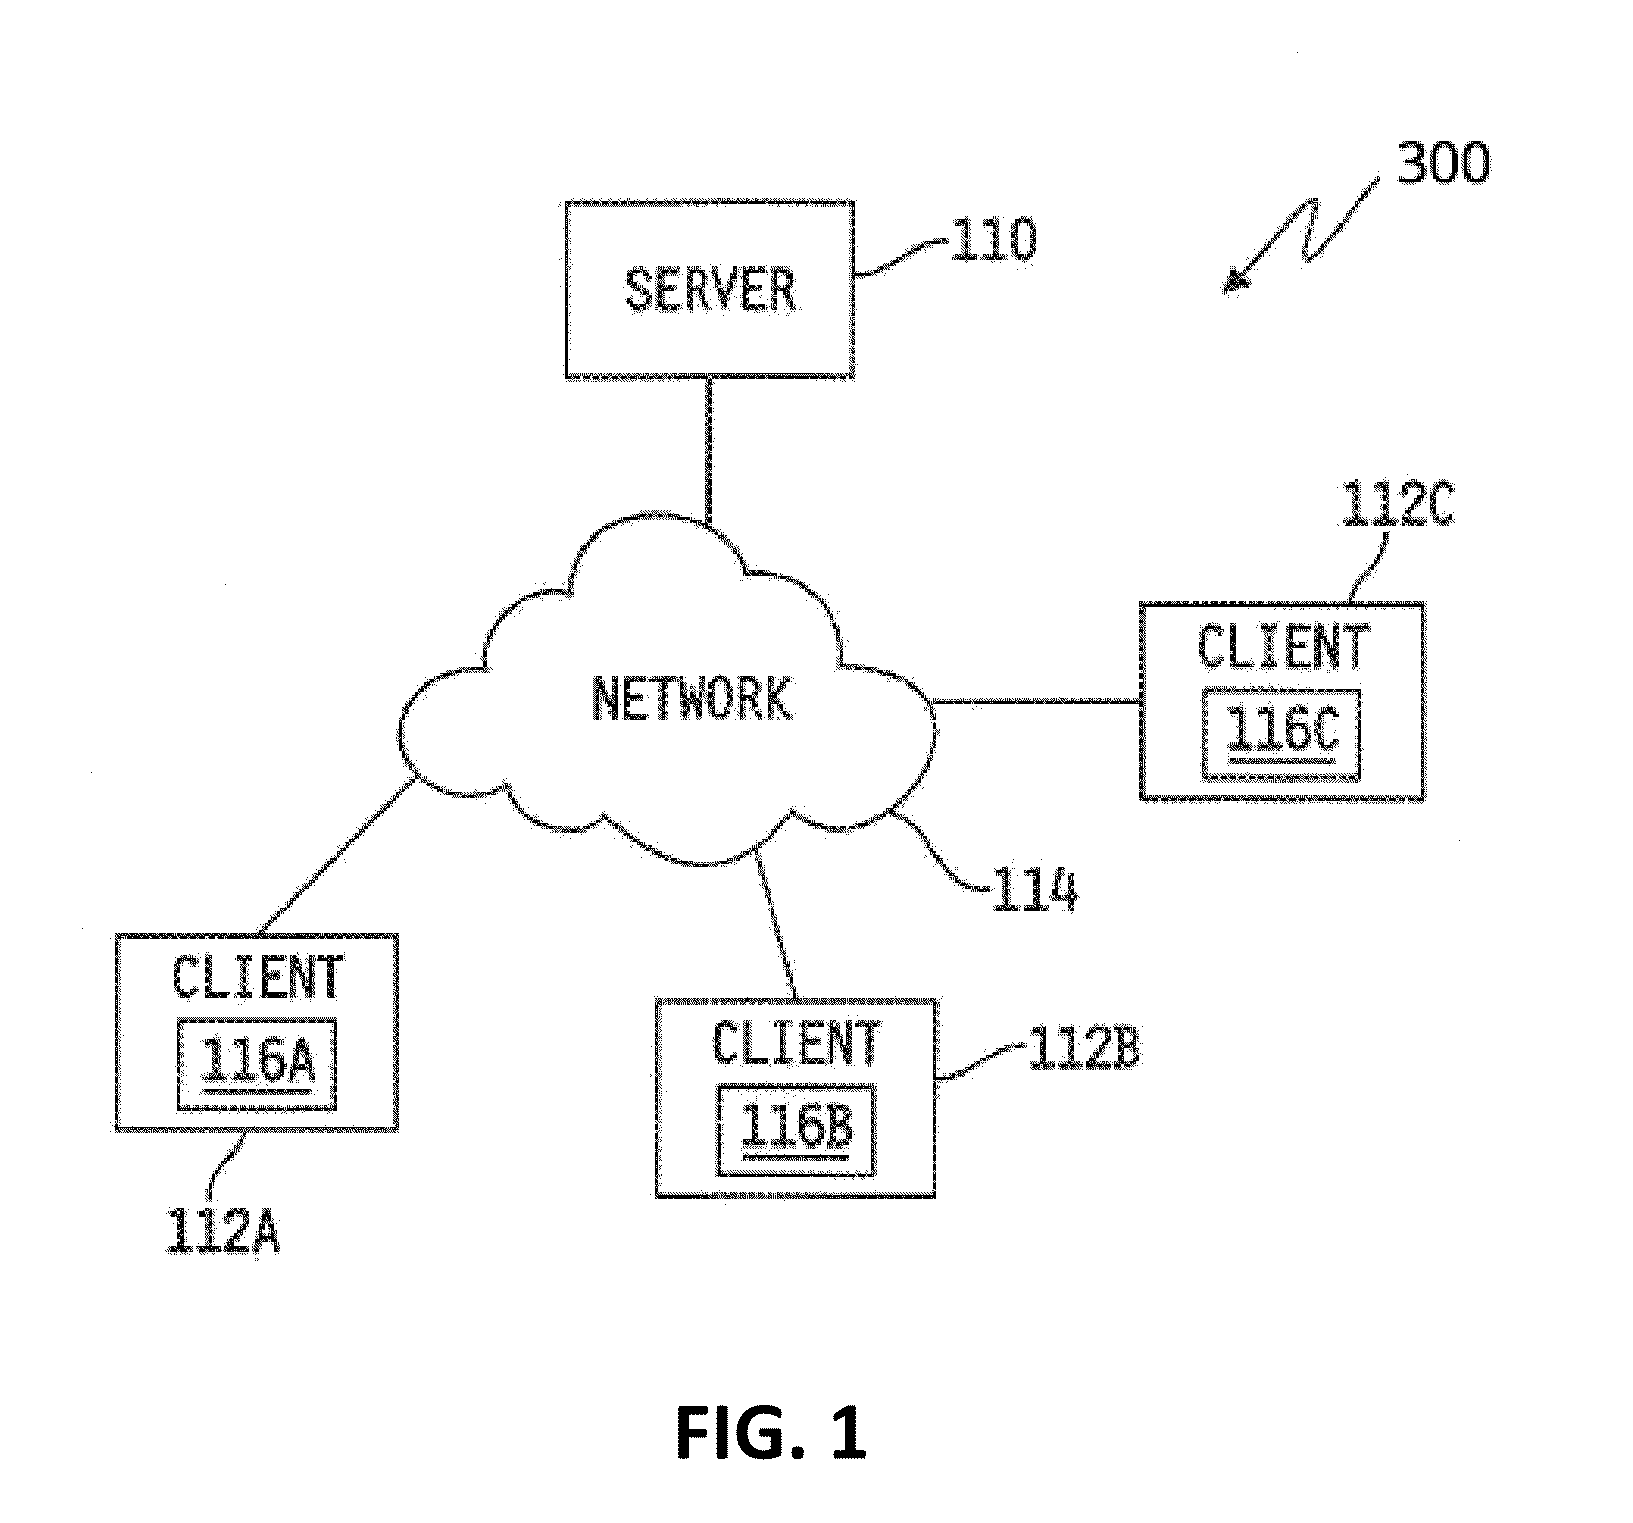 Networking systems and methods for facilitating communication and collaboration using a social-networking and interactive approach